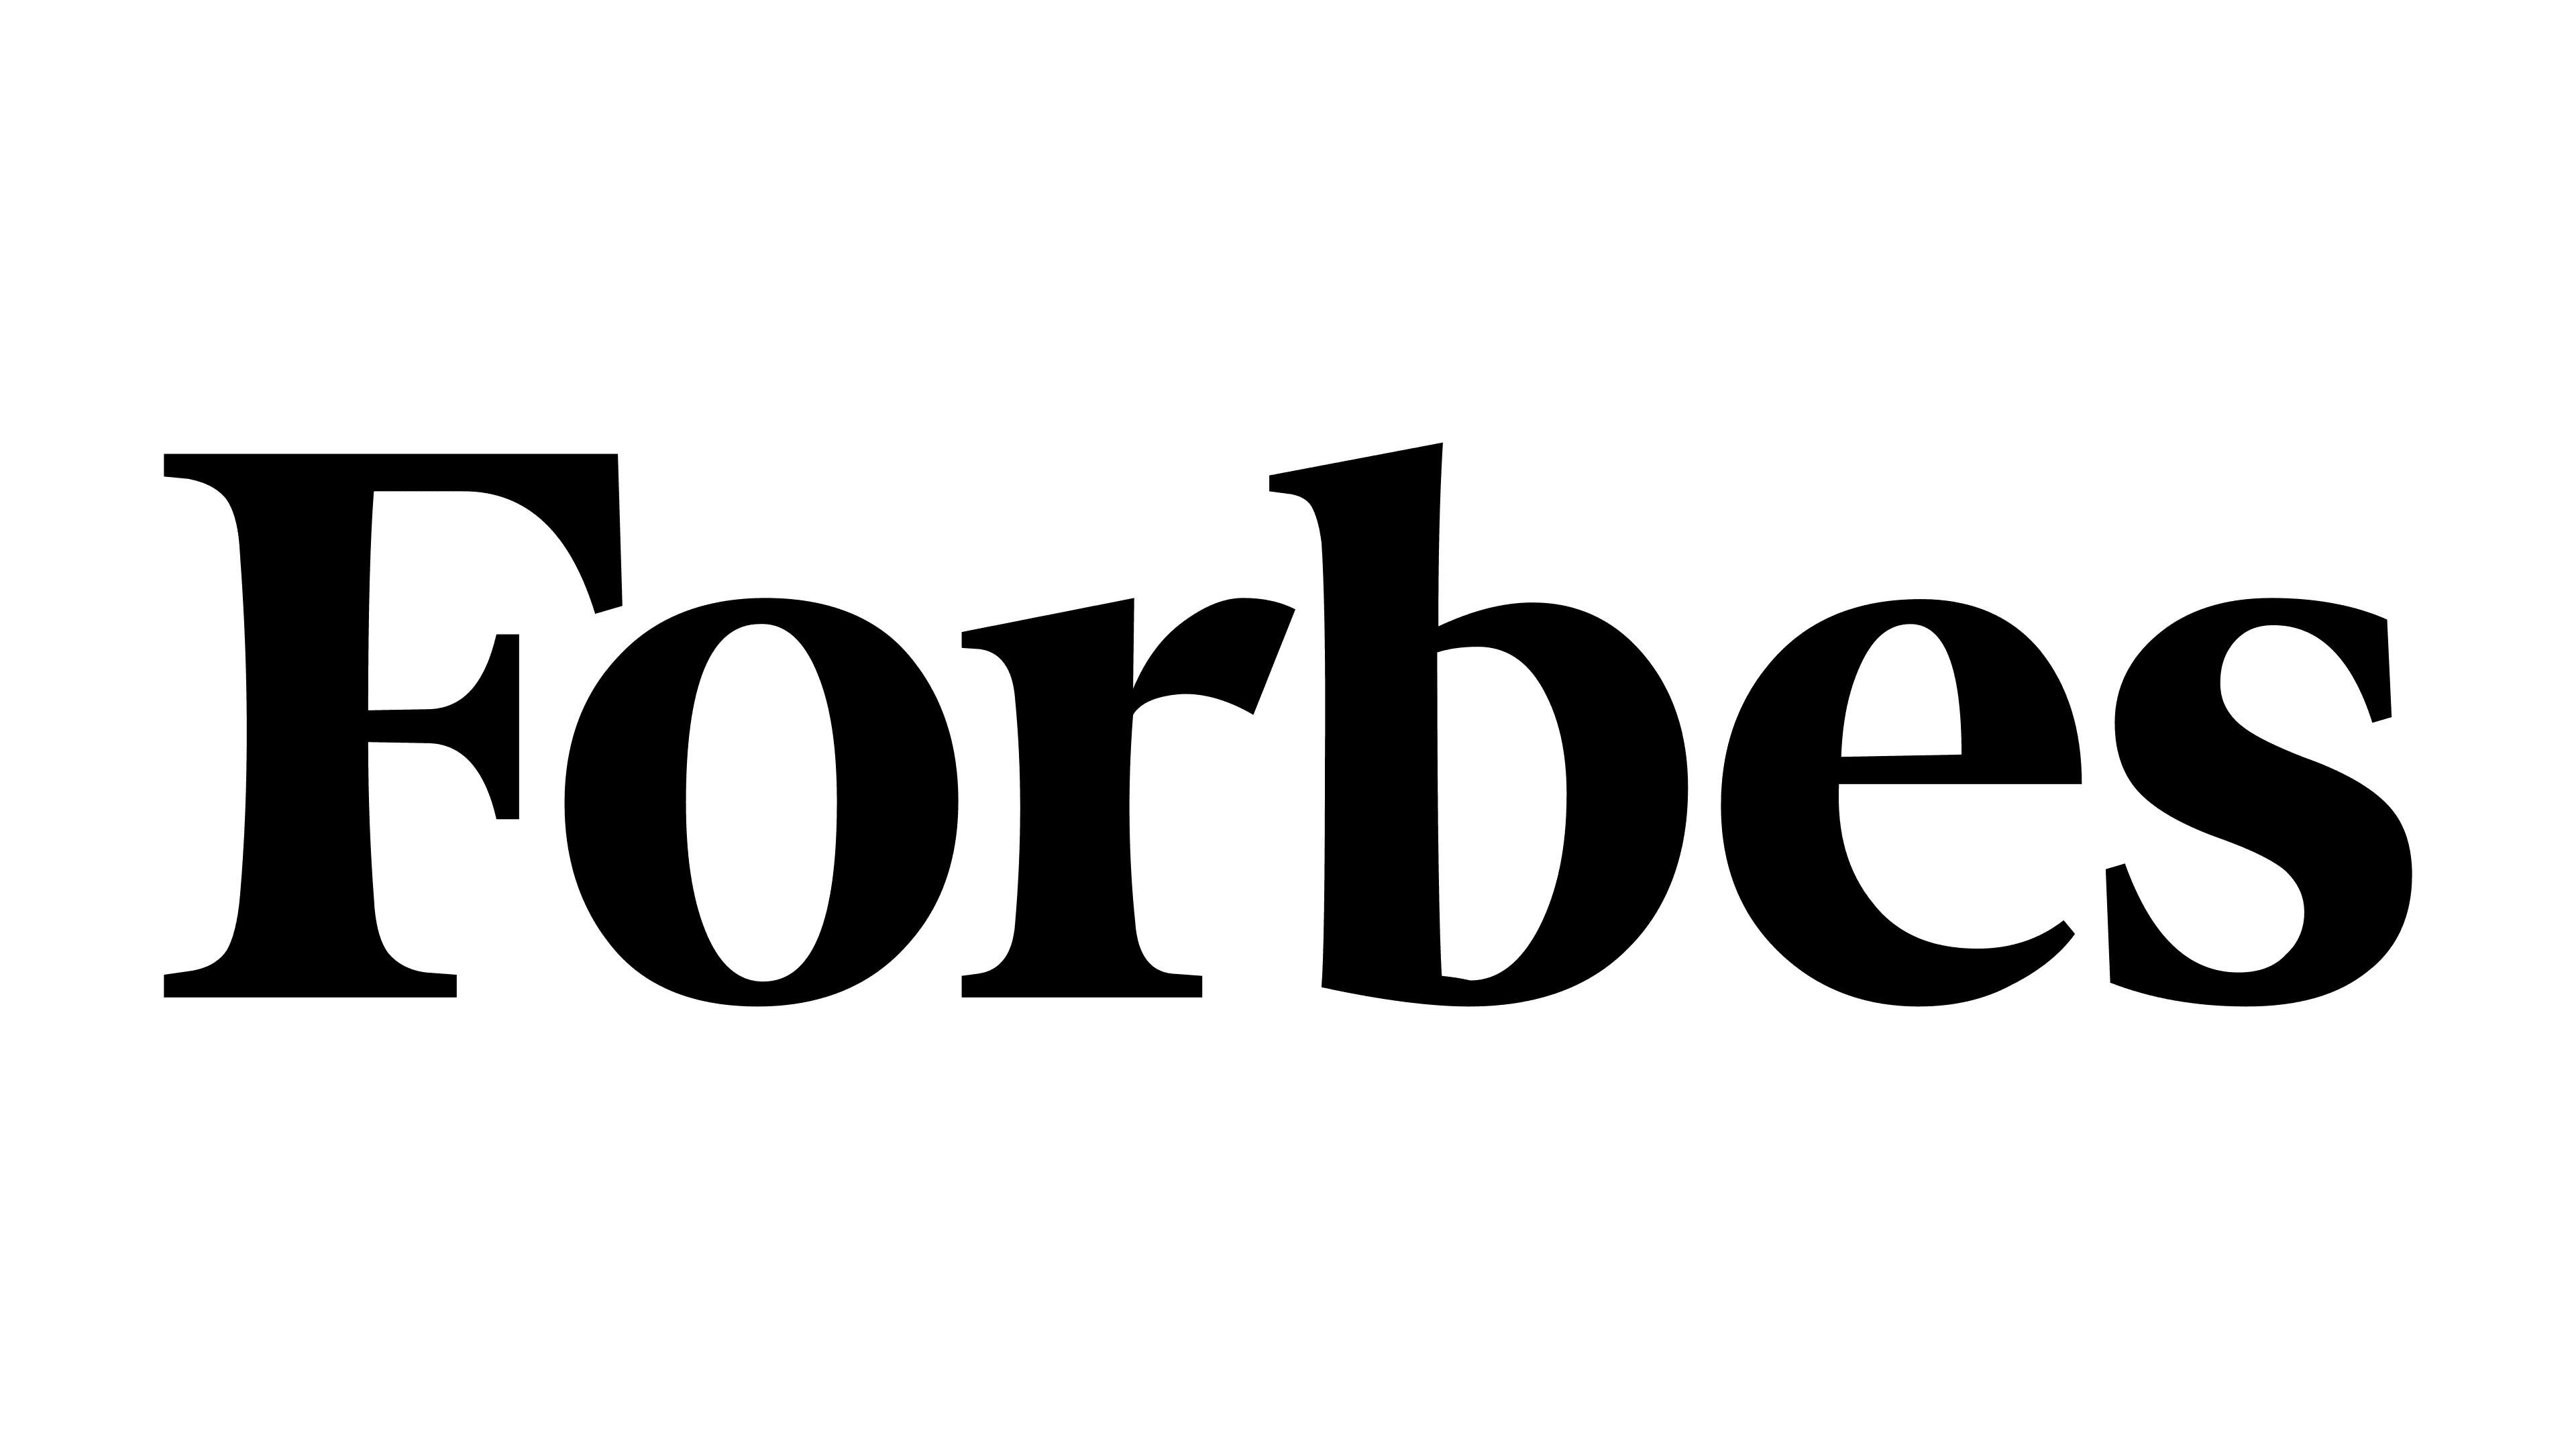 Forbes-logo.png__PID:600f8fe2-ac32-490d-9214-09aeb62757cb